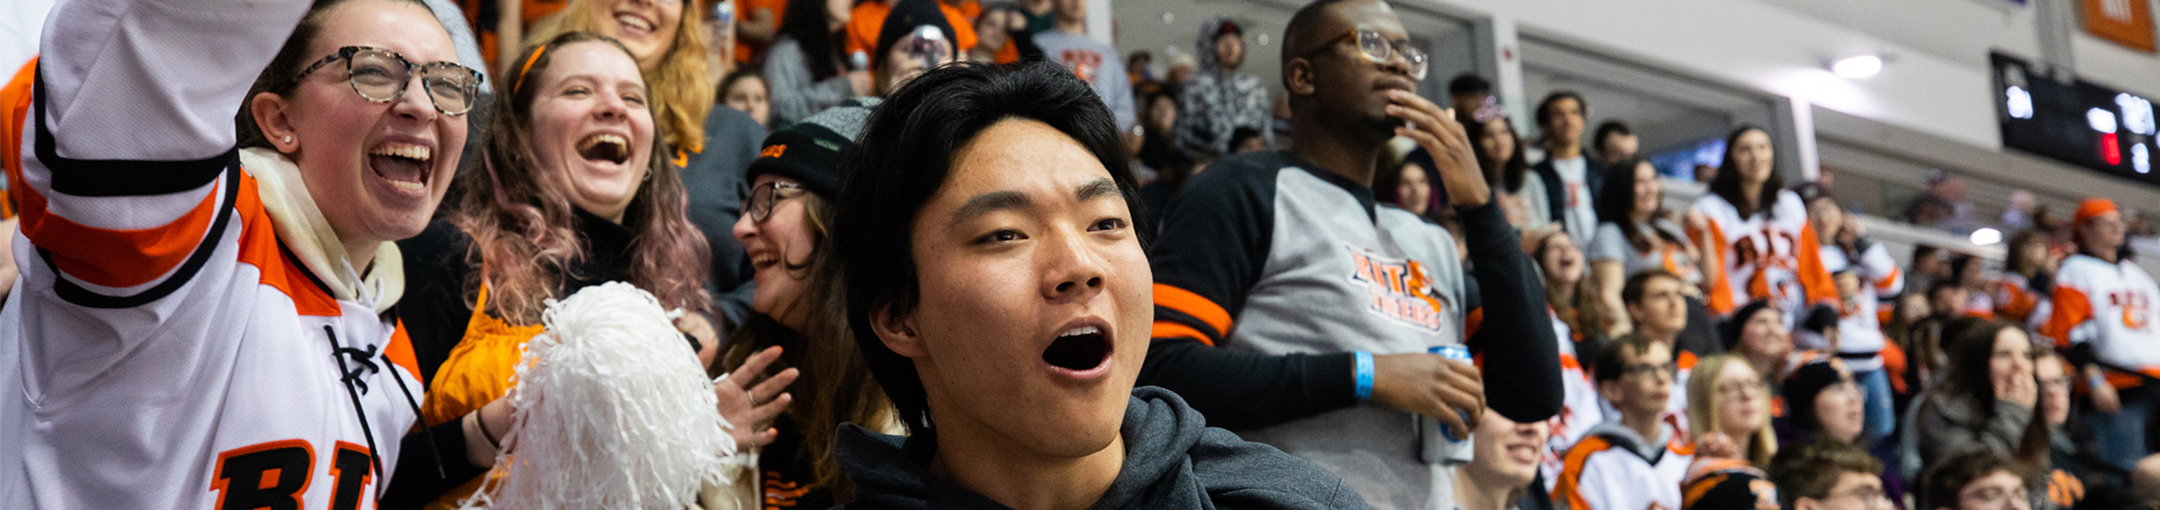 A crowd of students in the stands at the hockey arena wearing RIT apparel and cheering